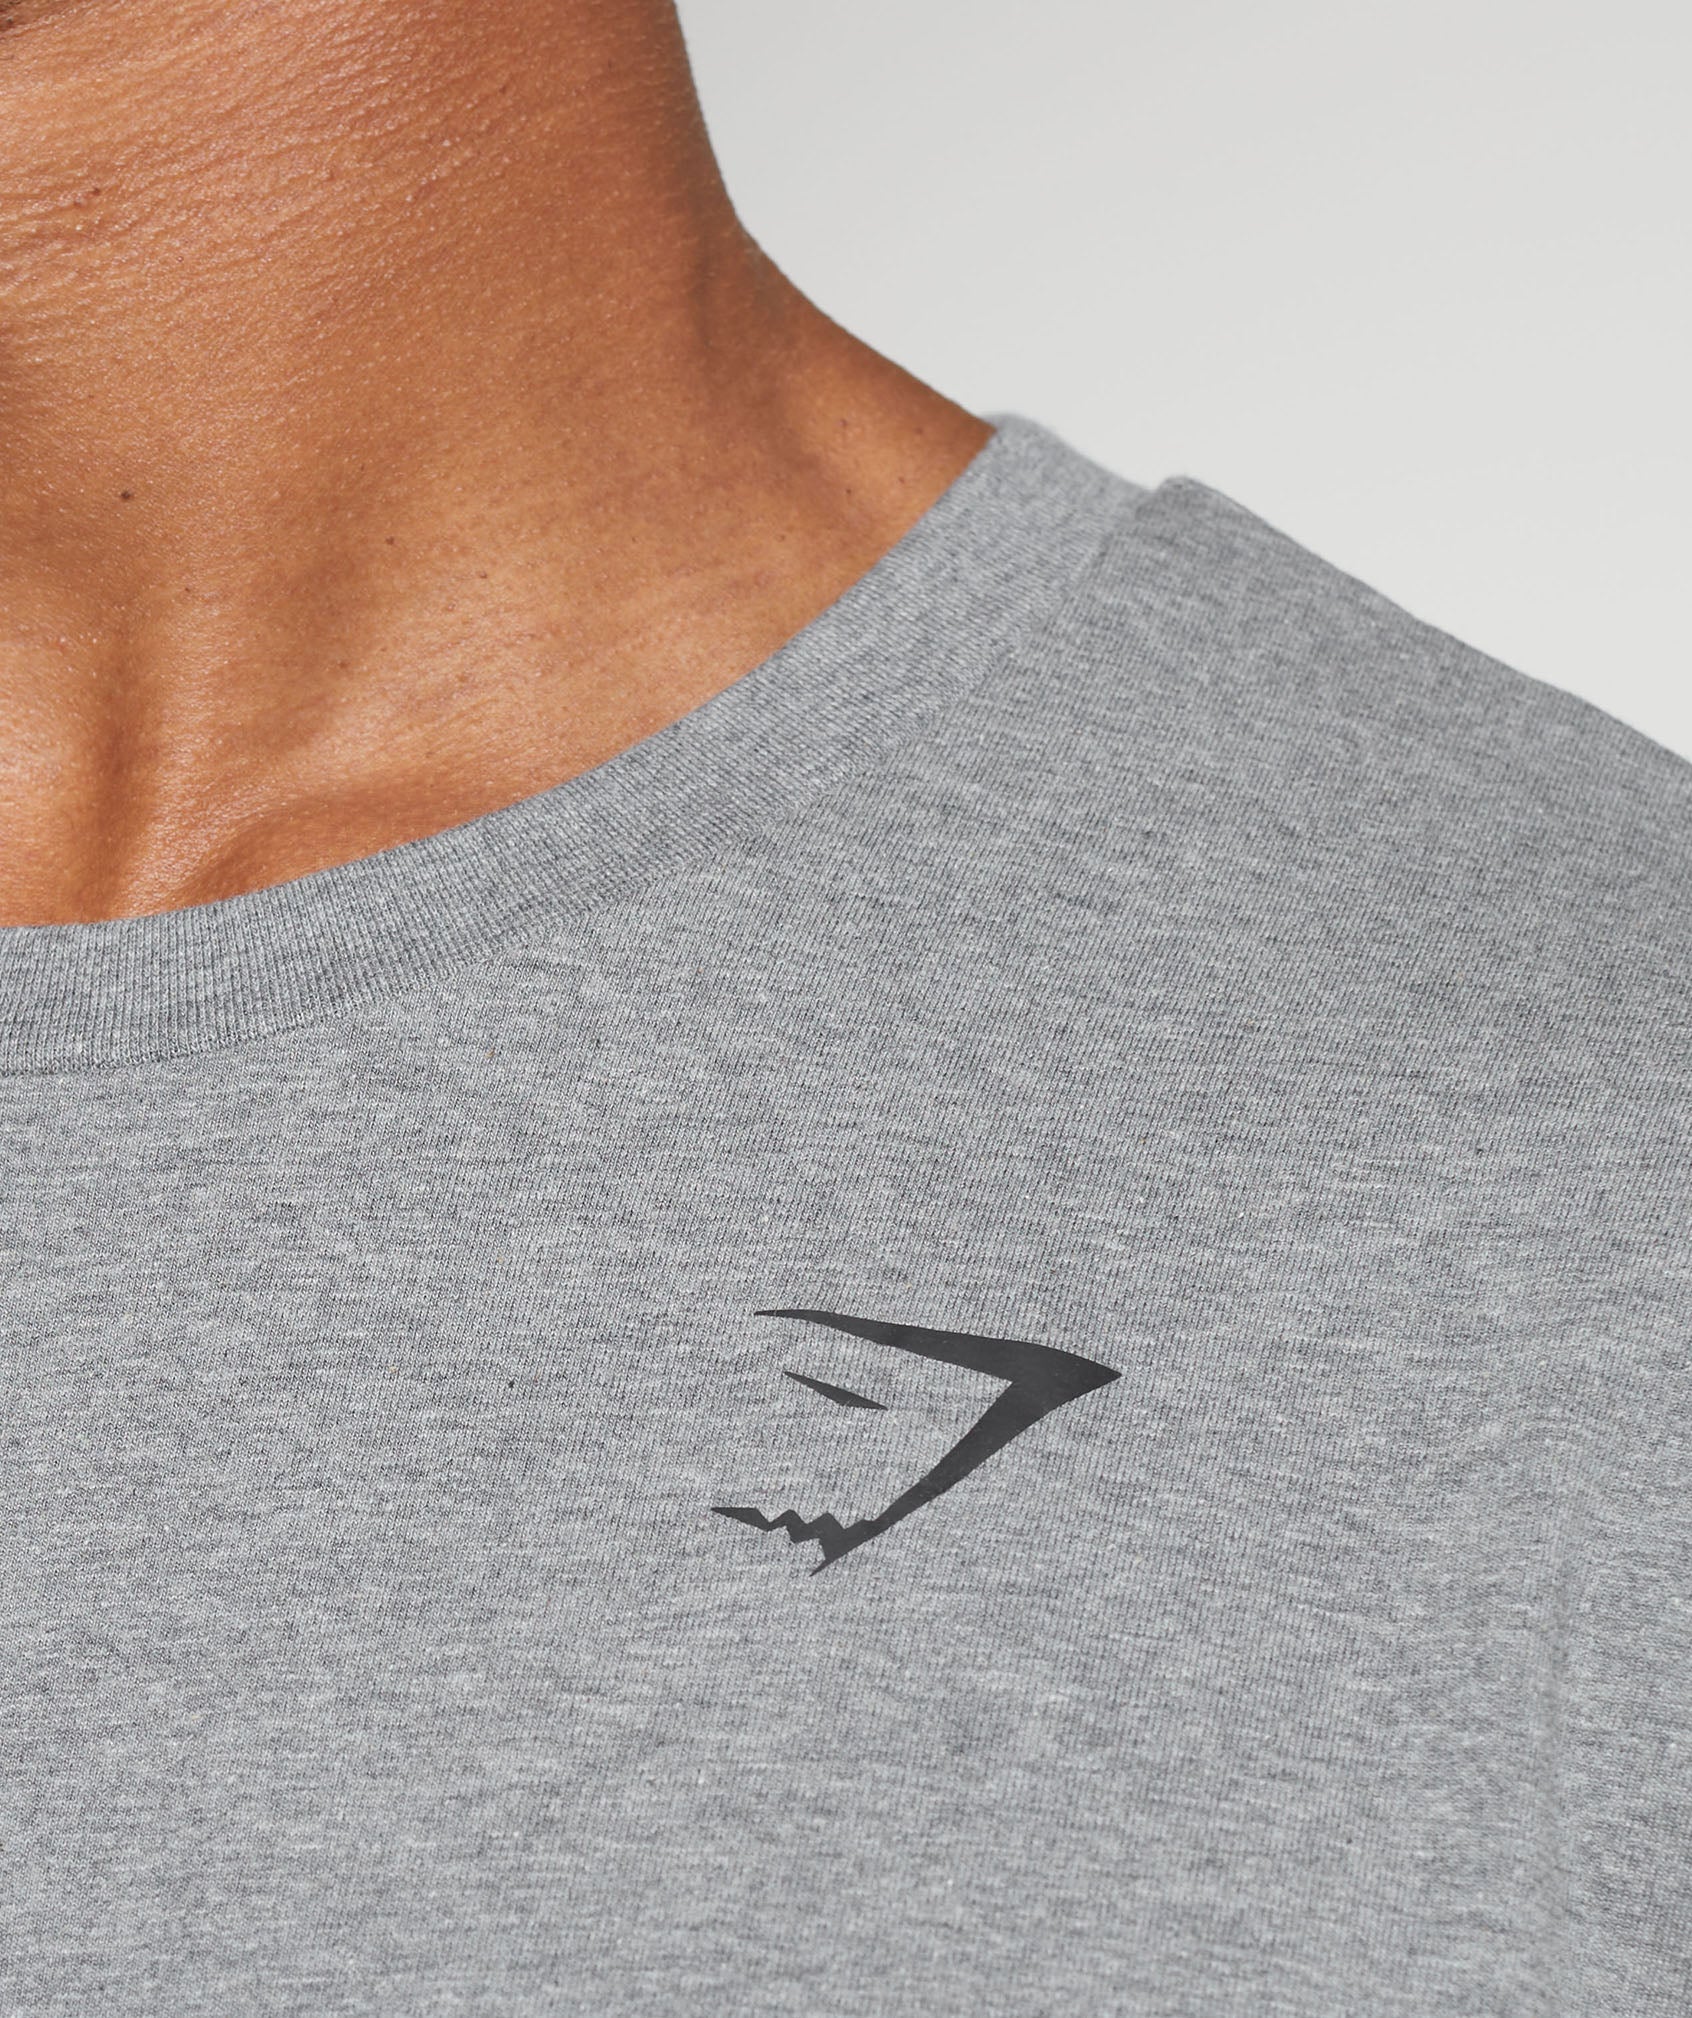 Essential Oversized T-Shirt in Charcoal Grey Marl - view 5